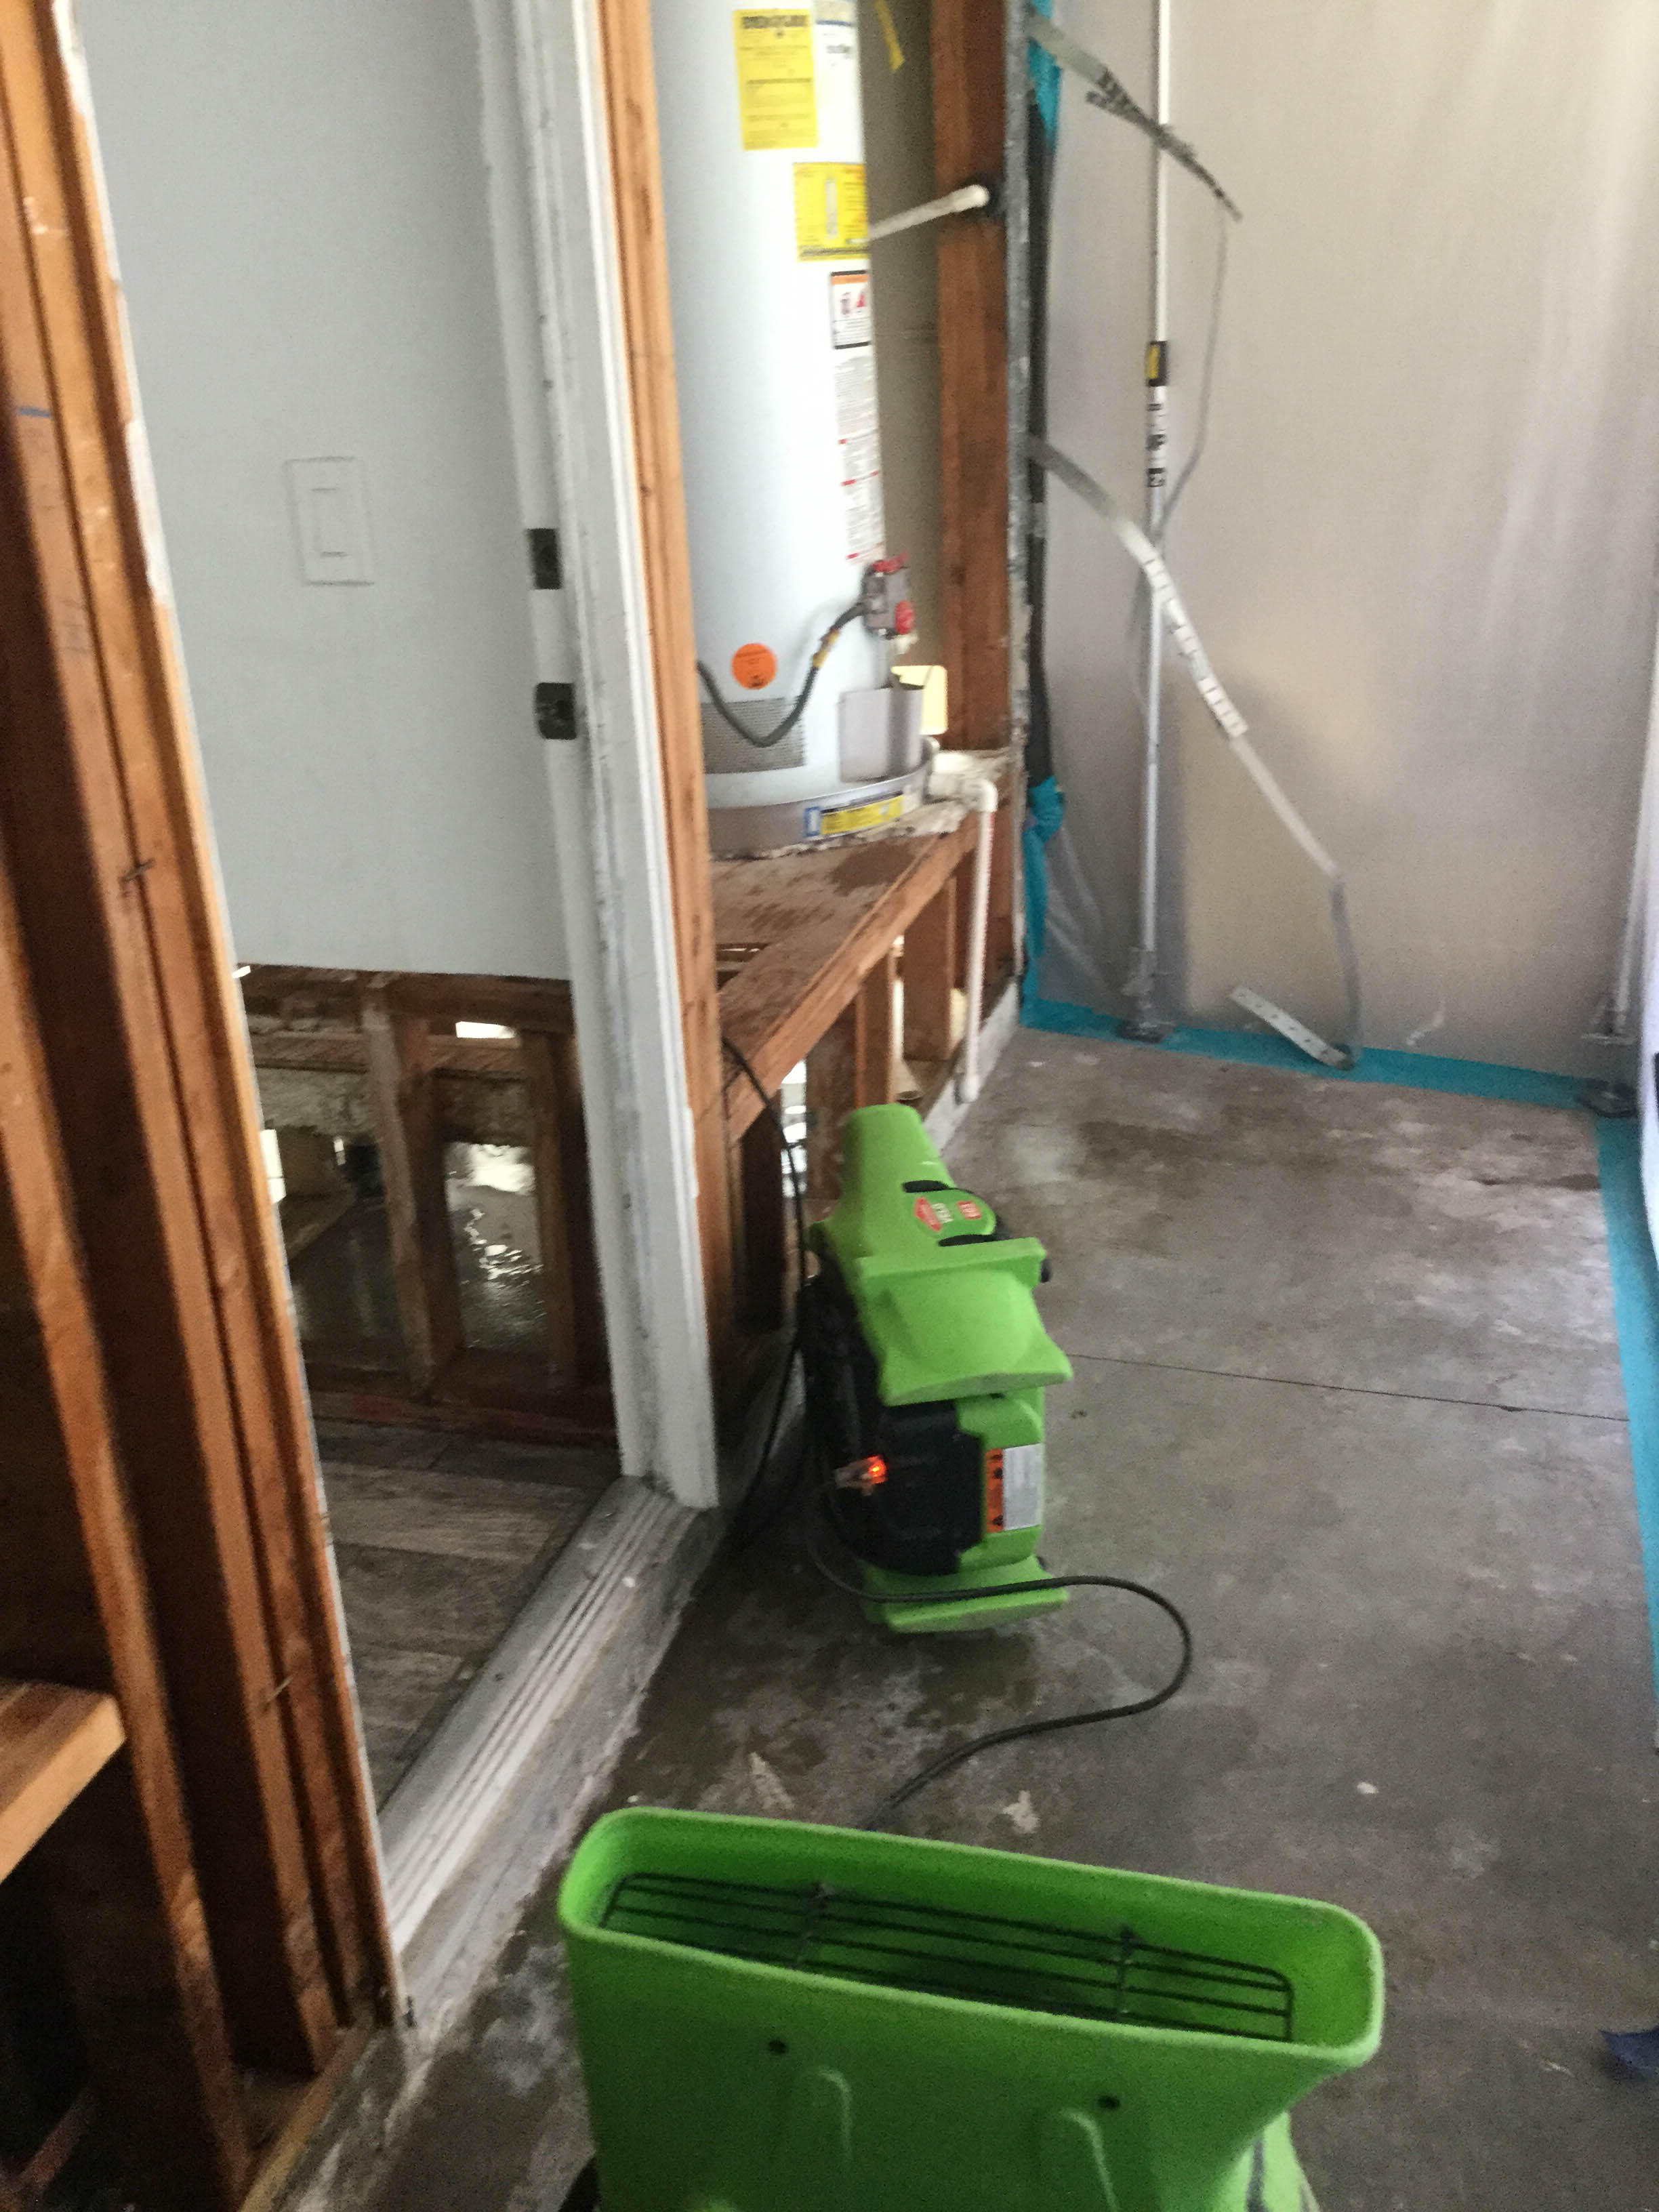 Water damage can cause frustrations in your home or business. SERVPRO of Anaheim West has a dedicated team ready to make your property look "Like it never even happened."